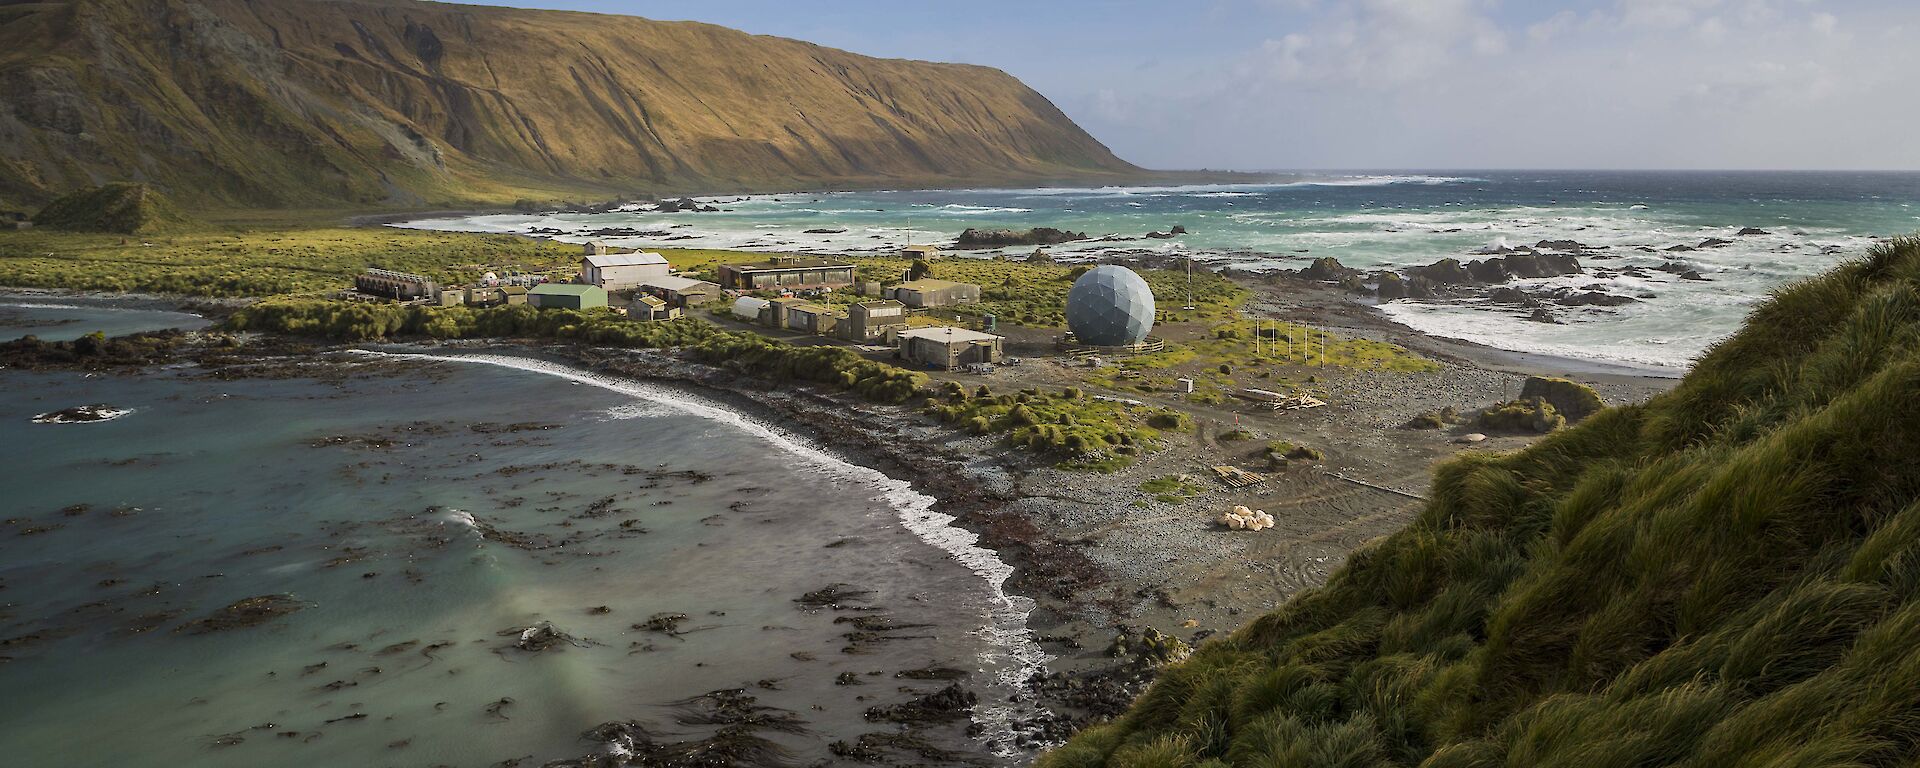 Station buildings on part of the isthmus of Macquarie Island.